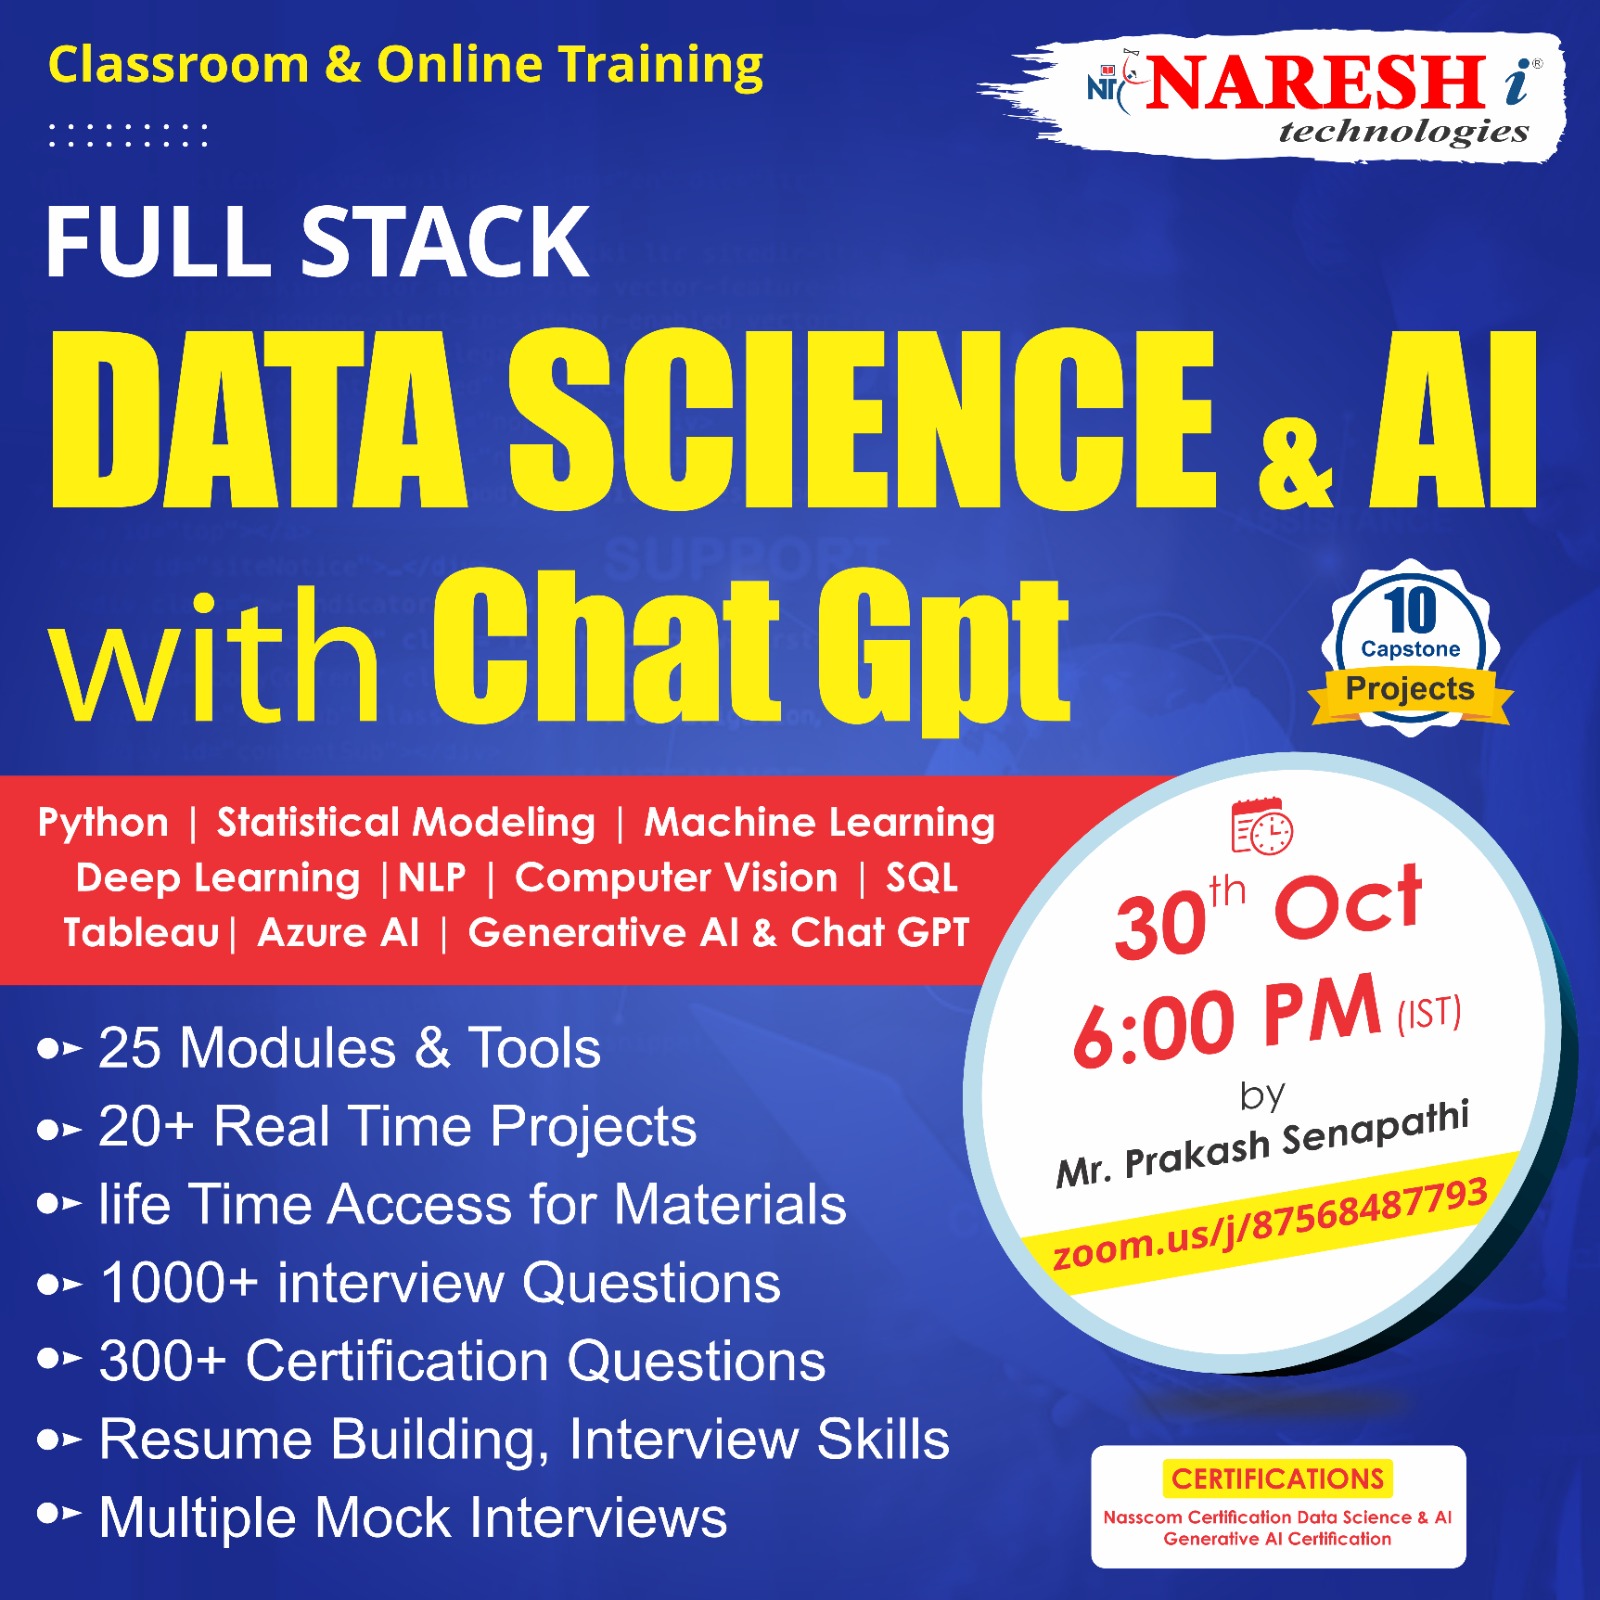 Best Online Course Full Stack Data Science & AI Training in NareshIT, Online Event